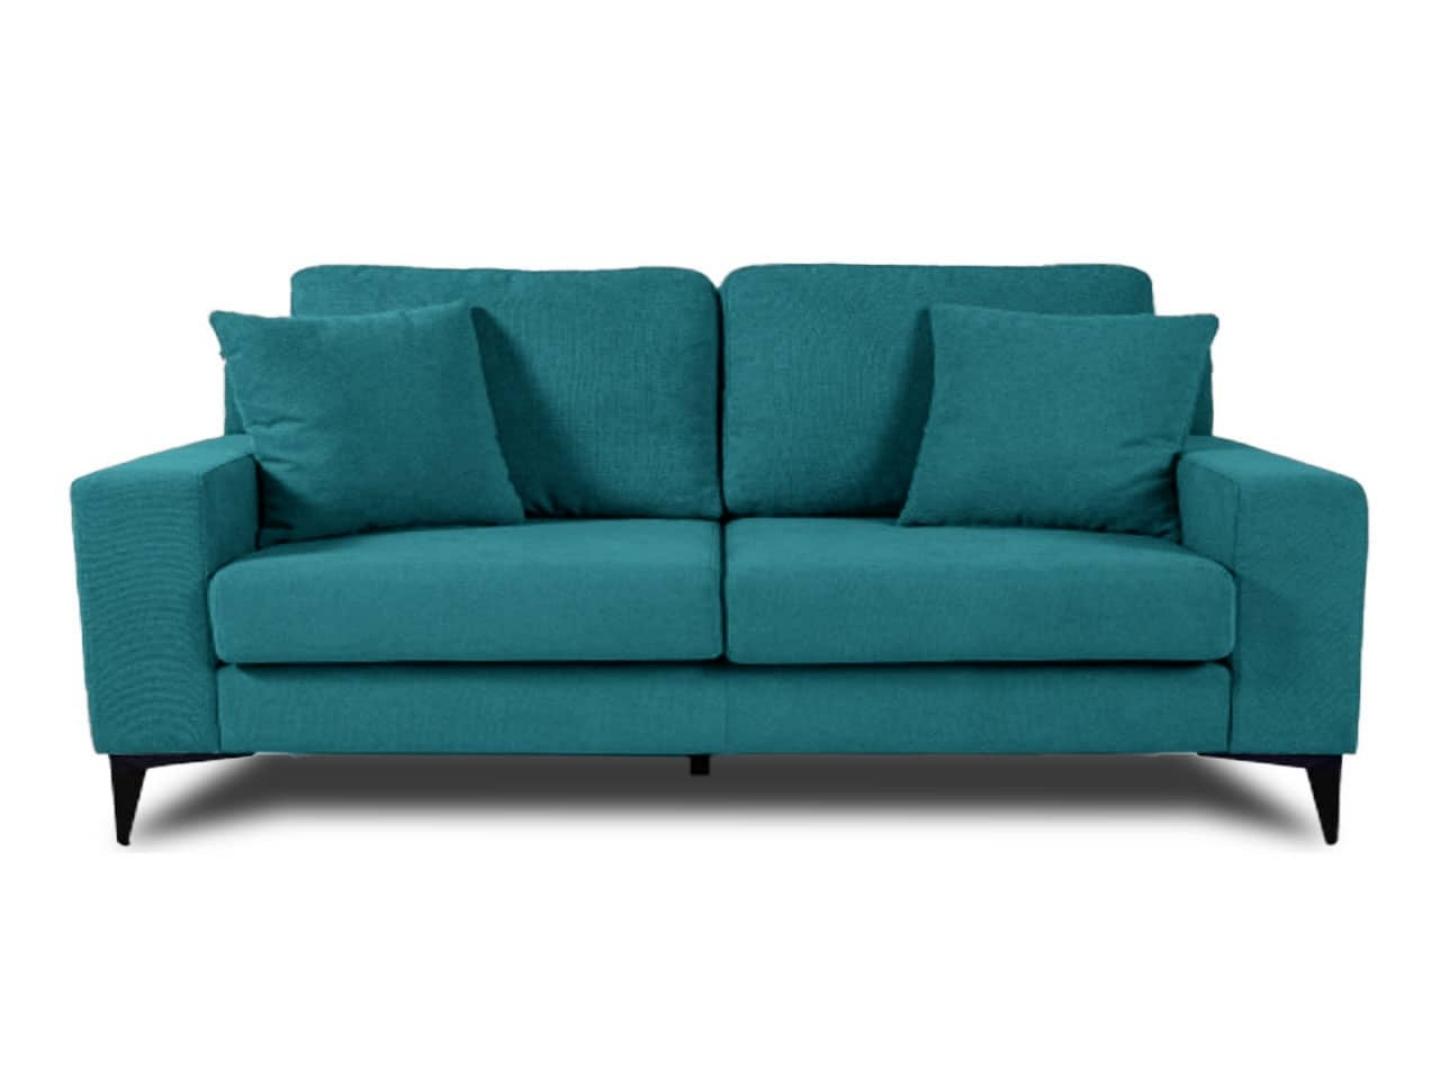 star sofa water and stain resistant fabric / Turquoise